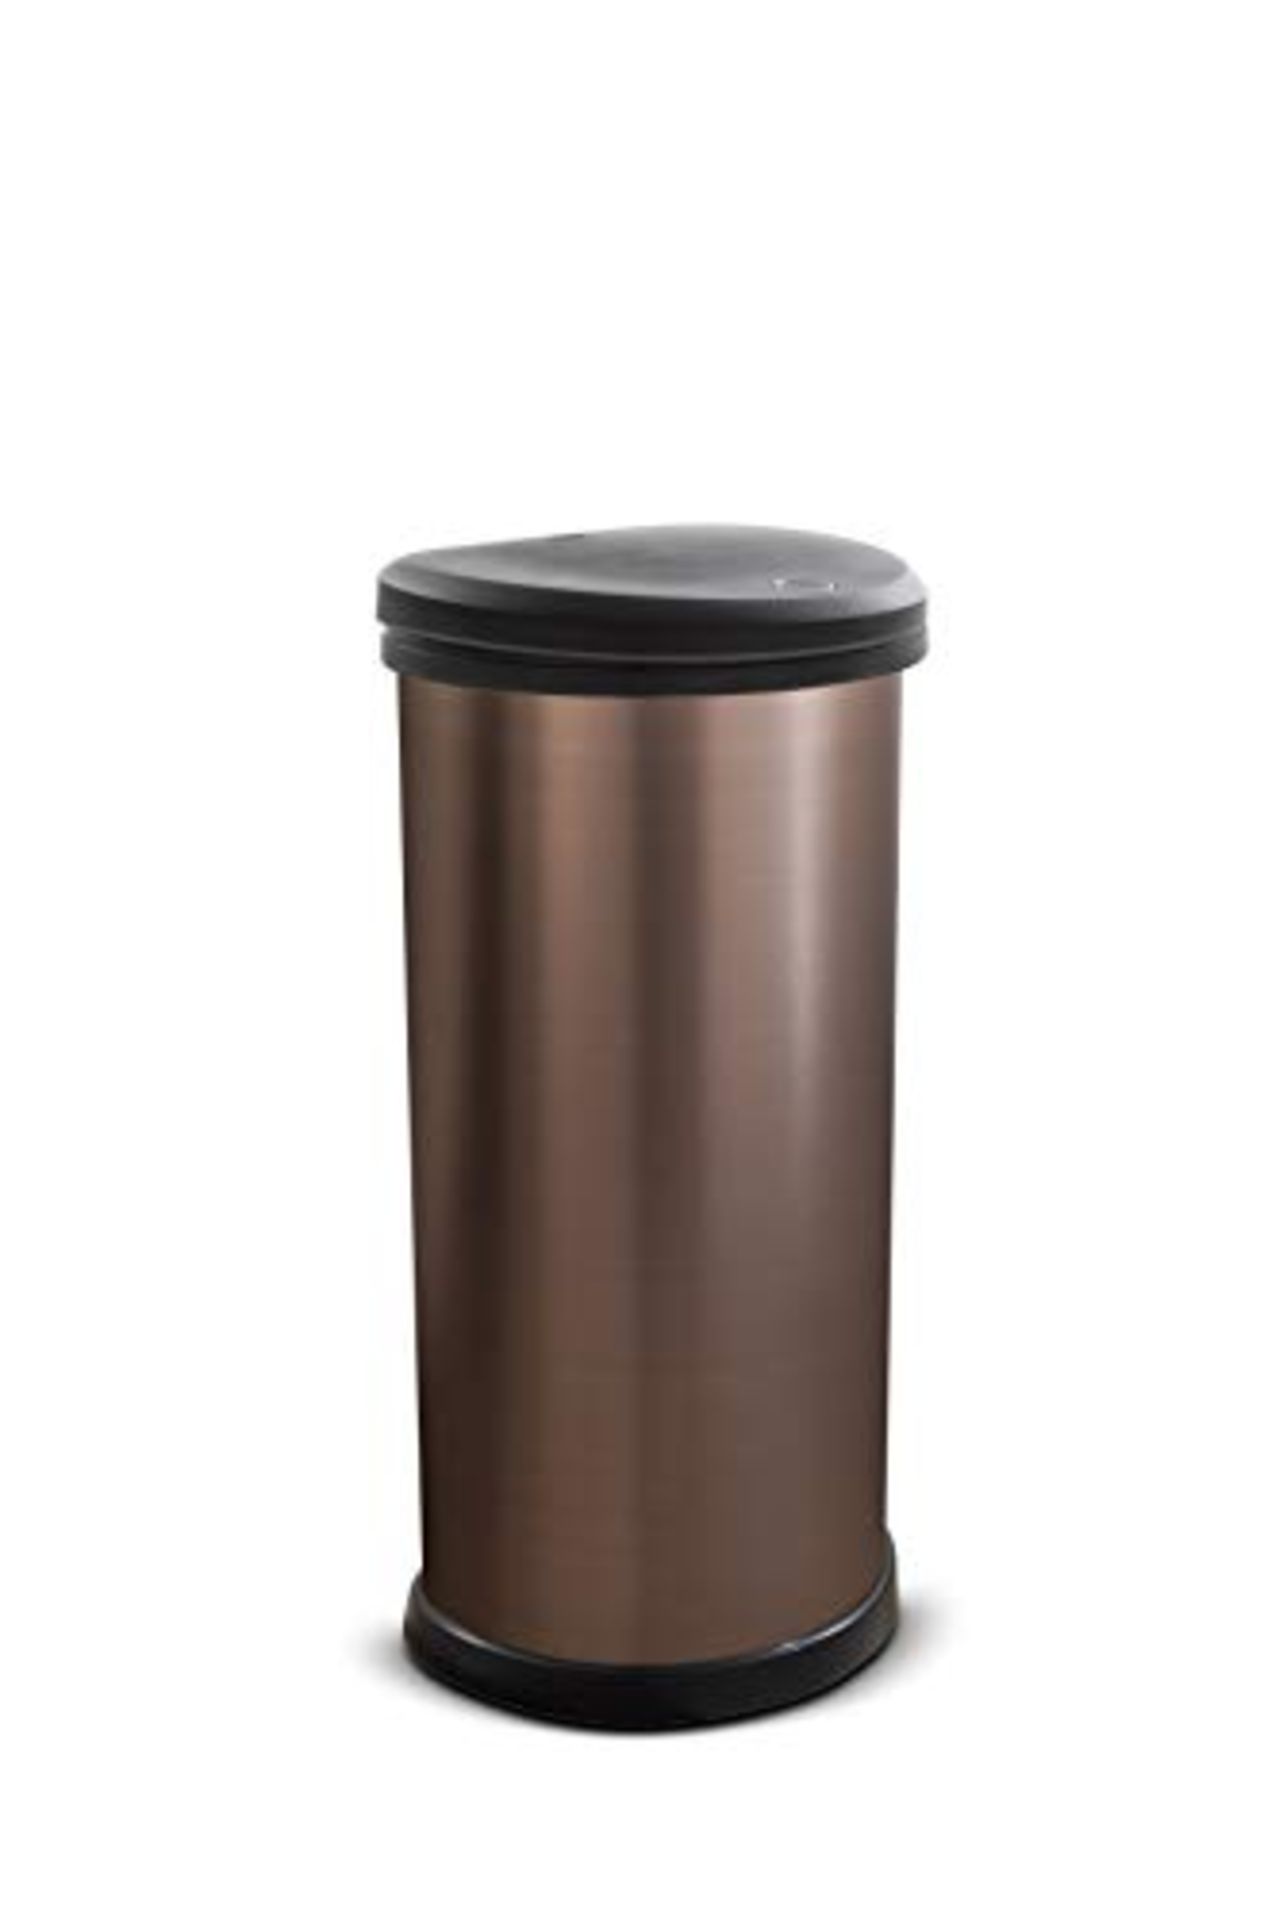 Curver Metal Effect Kitchen One Touch Deco Bin, Rose Gold, 40 Litre